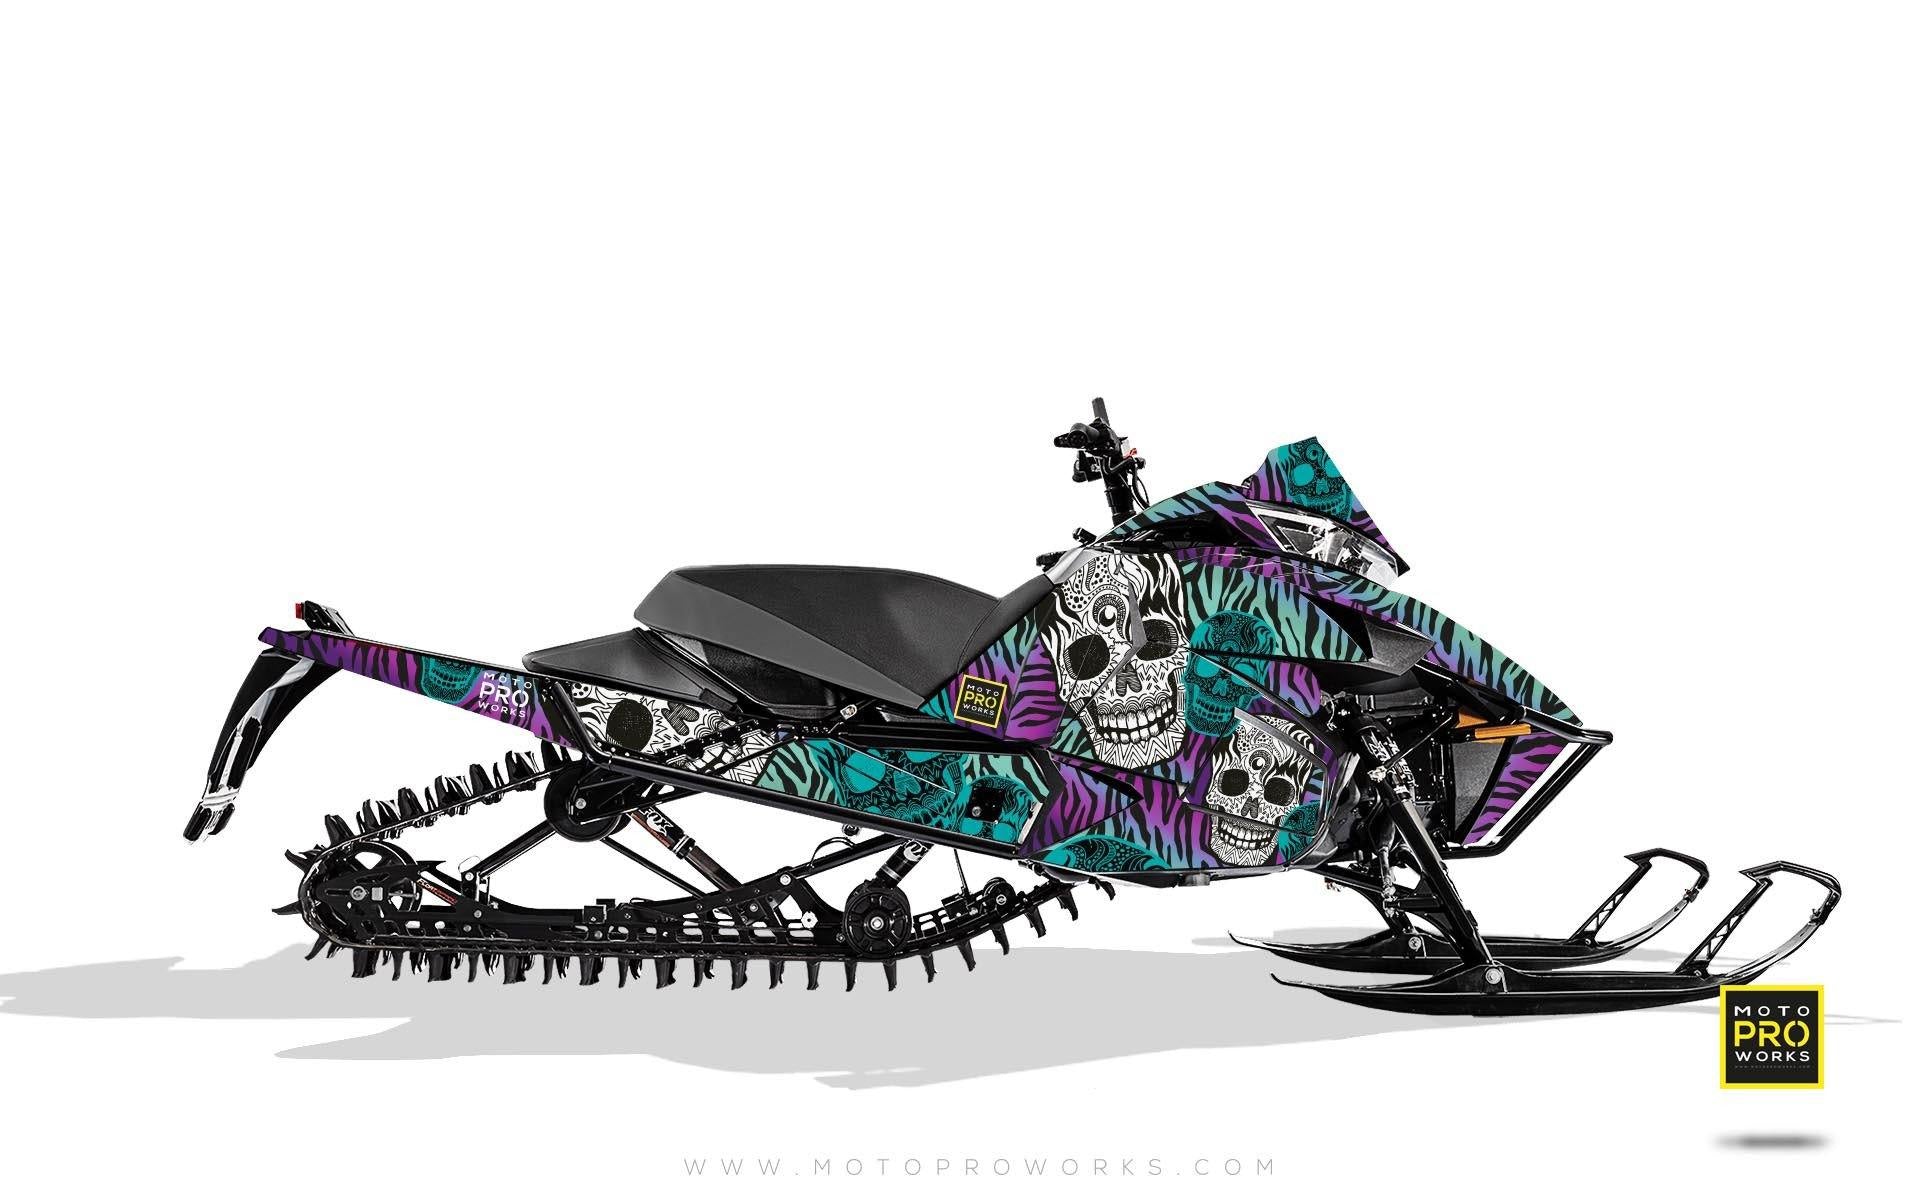 Arctic Cat Graphics - "Fiesta" (purple solid) - MotoProWorks | Decals and Bike Graphic kit